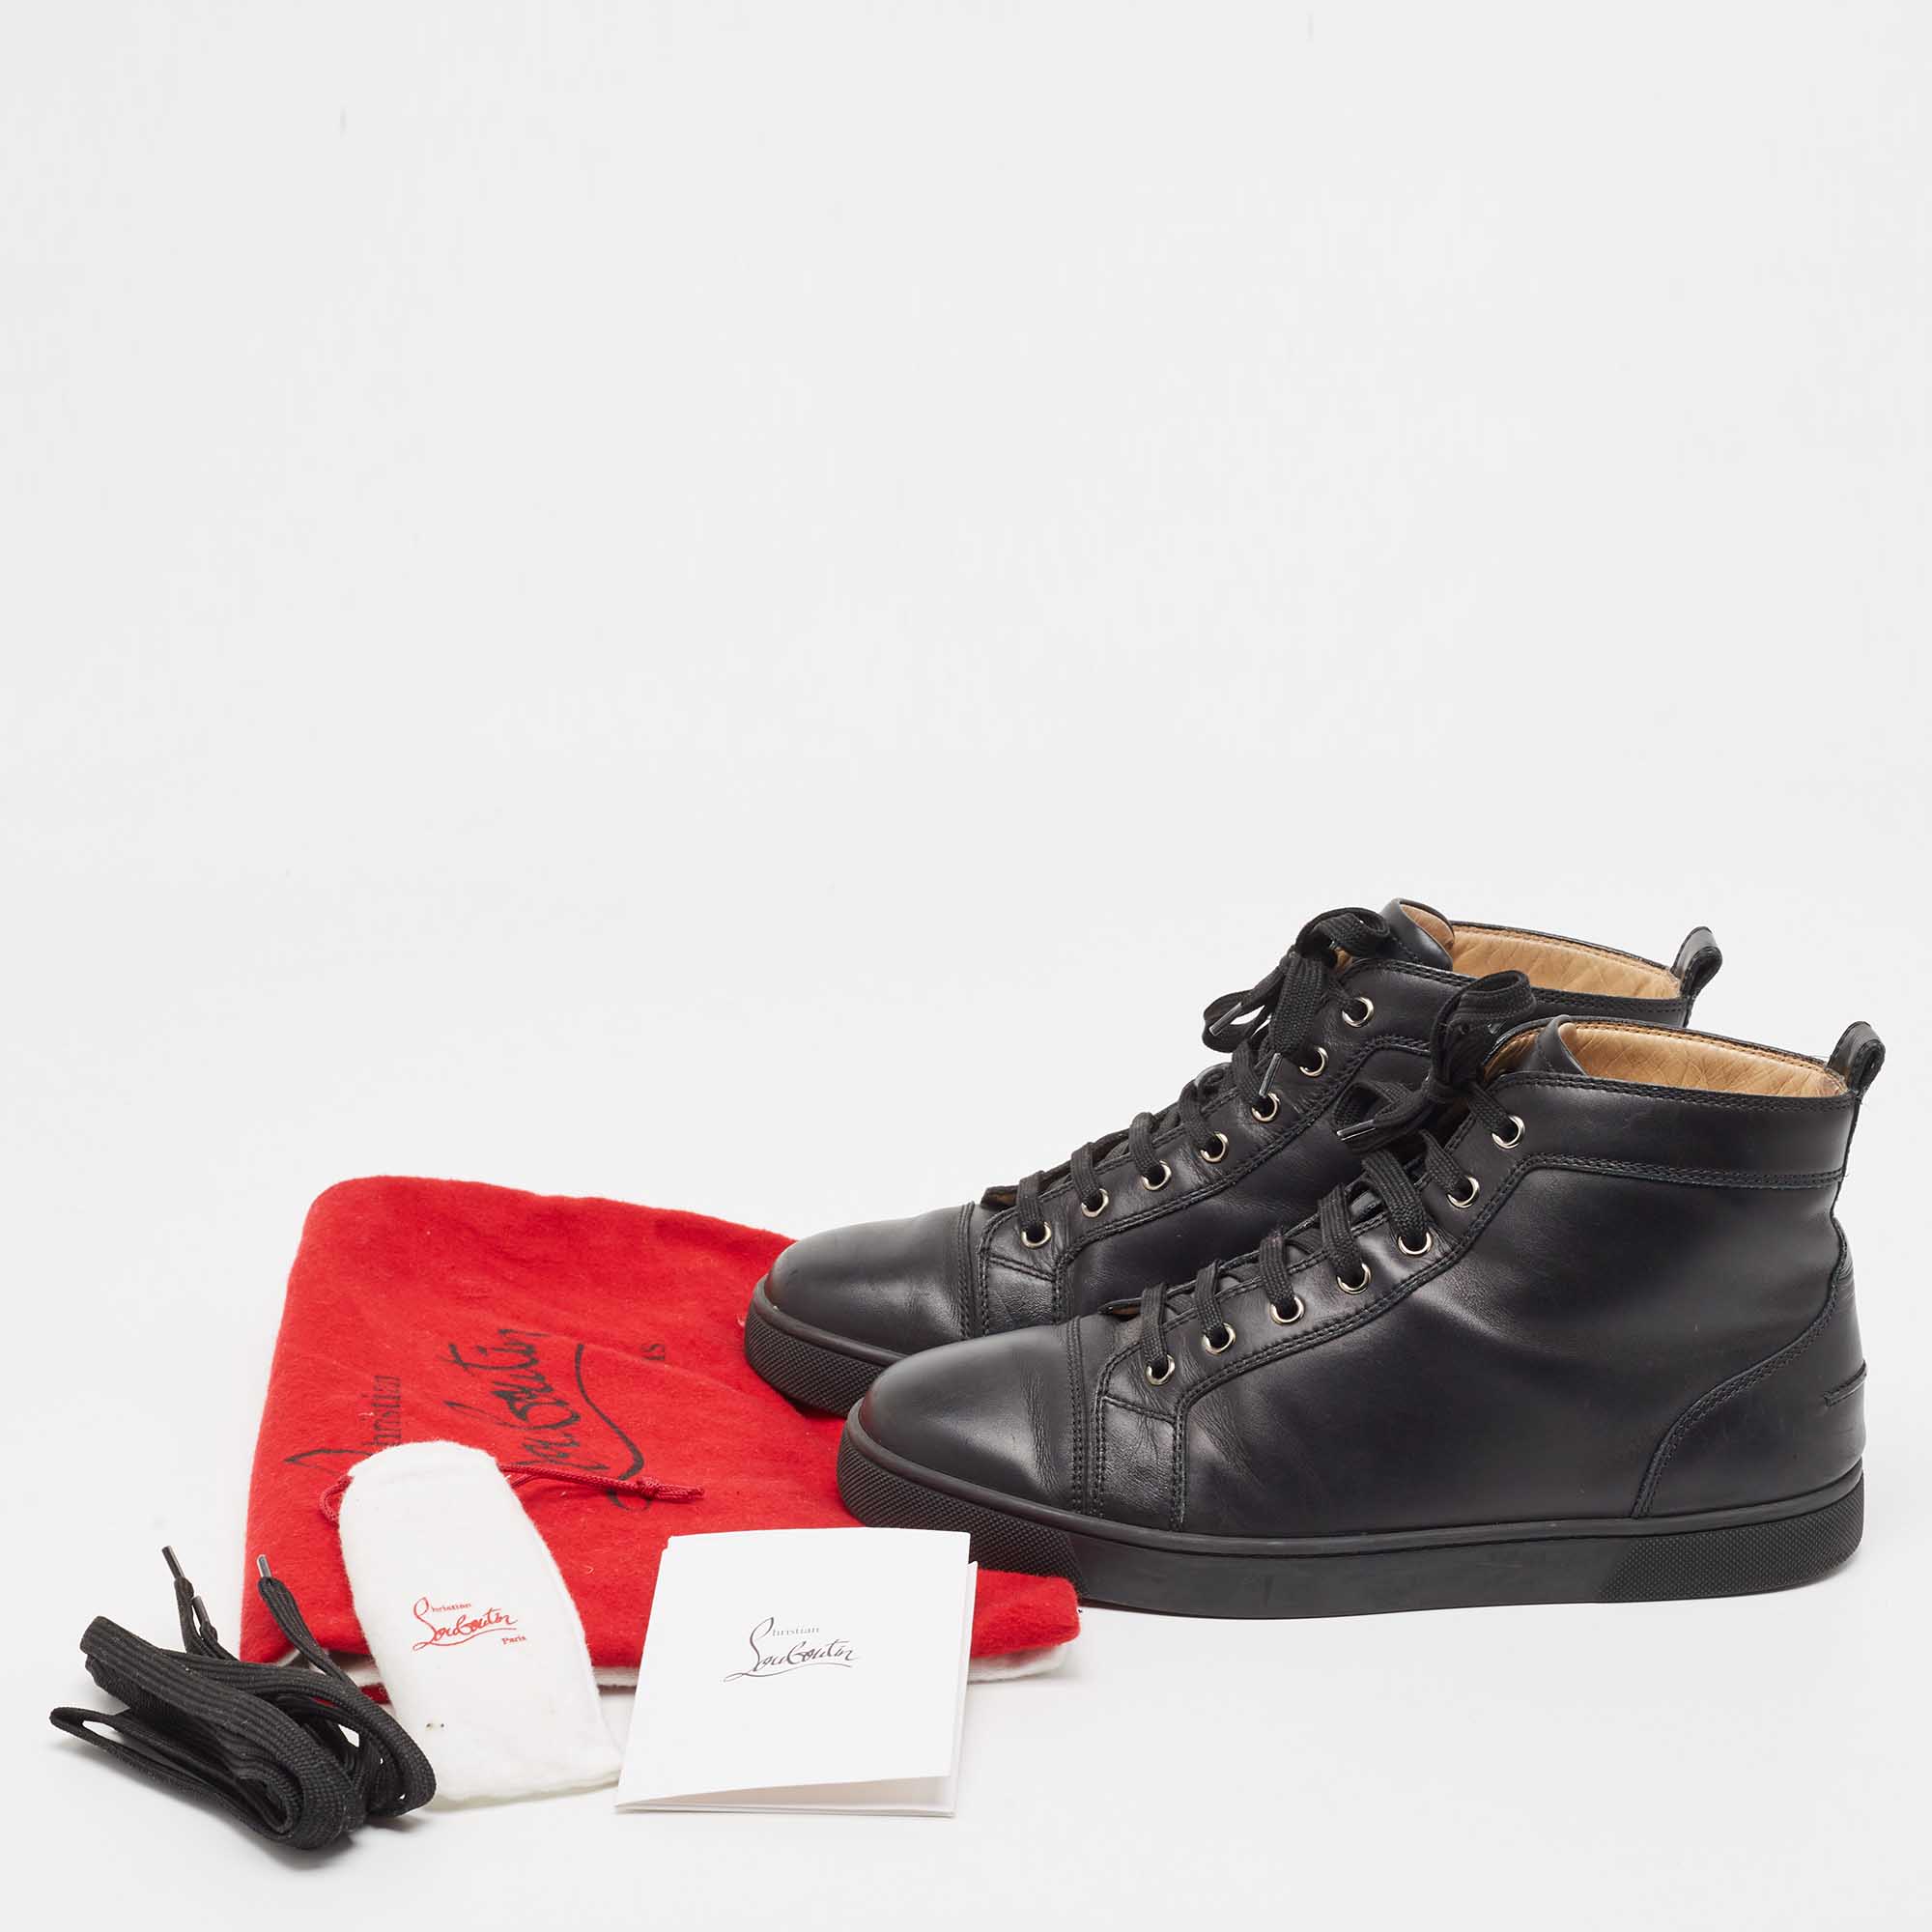 Christian Louboutin Black Leather Louis High Top Sneakers Size 42.5